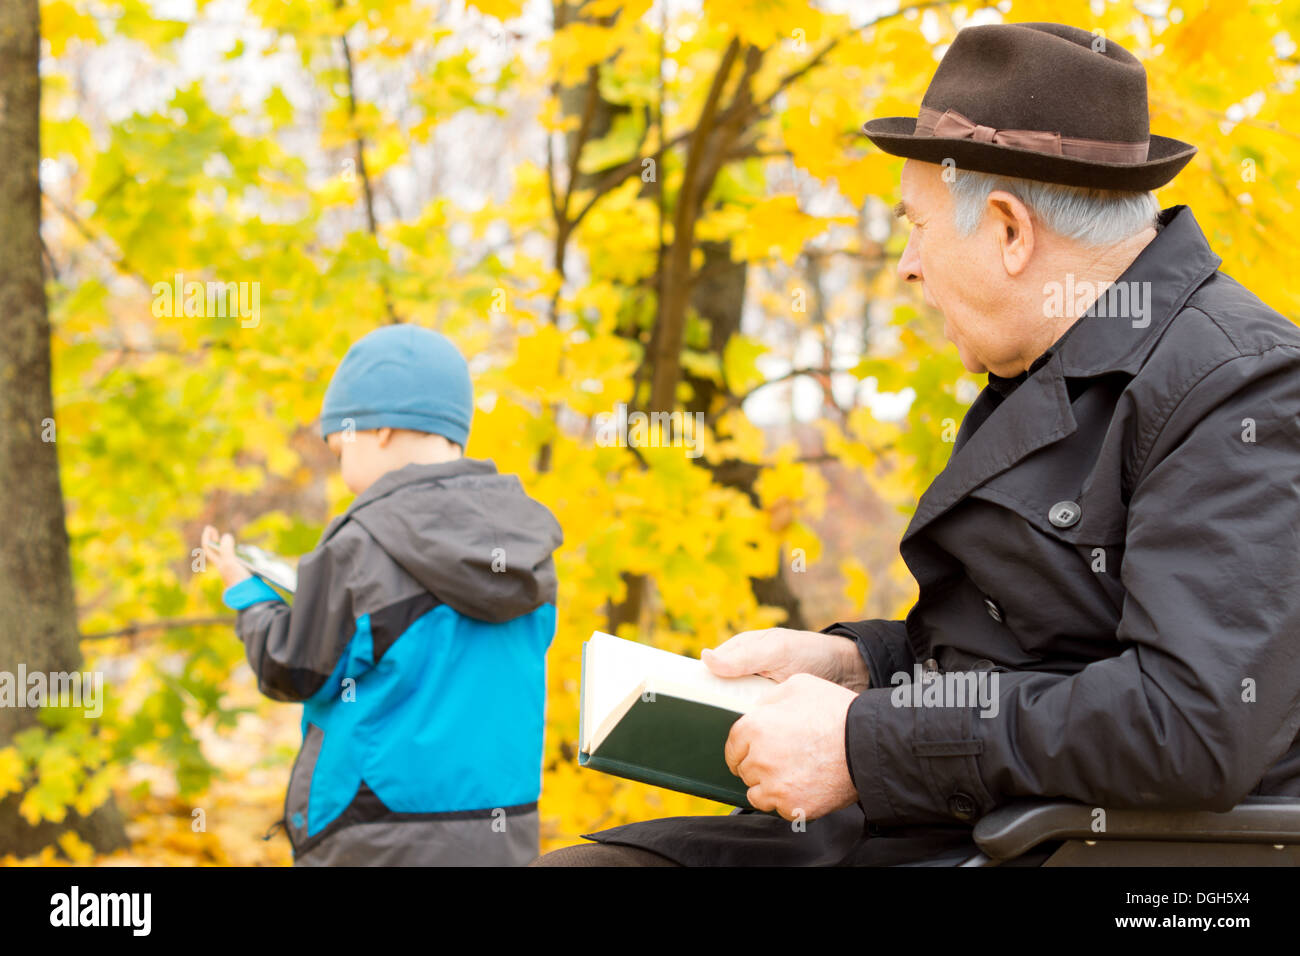 Grandfather in a warm overcoat and hat sitting with a book watching over his young grandchild in a colourful yellow autumn garden. Stock Photo